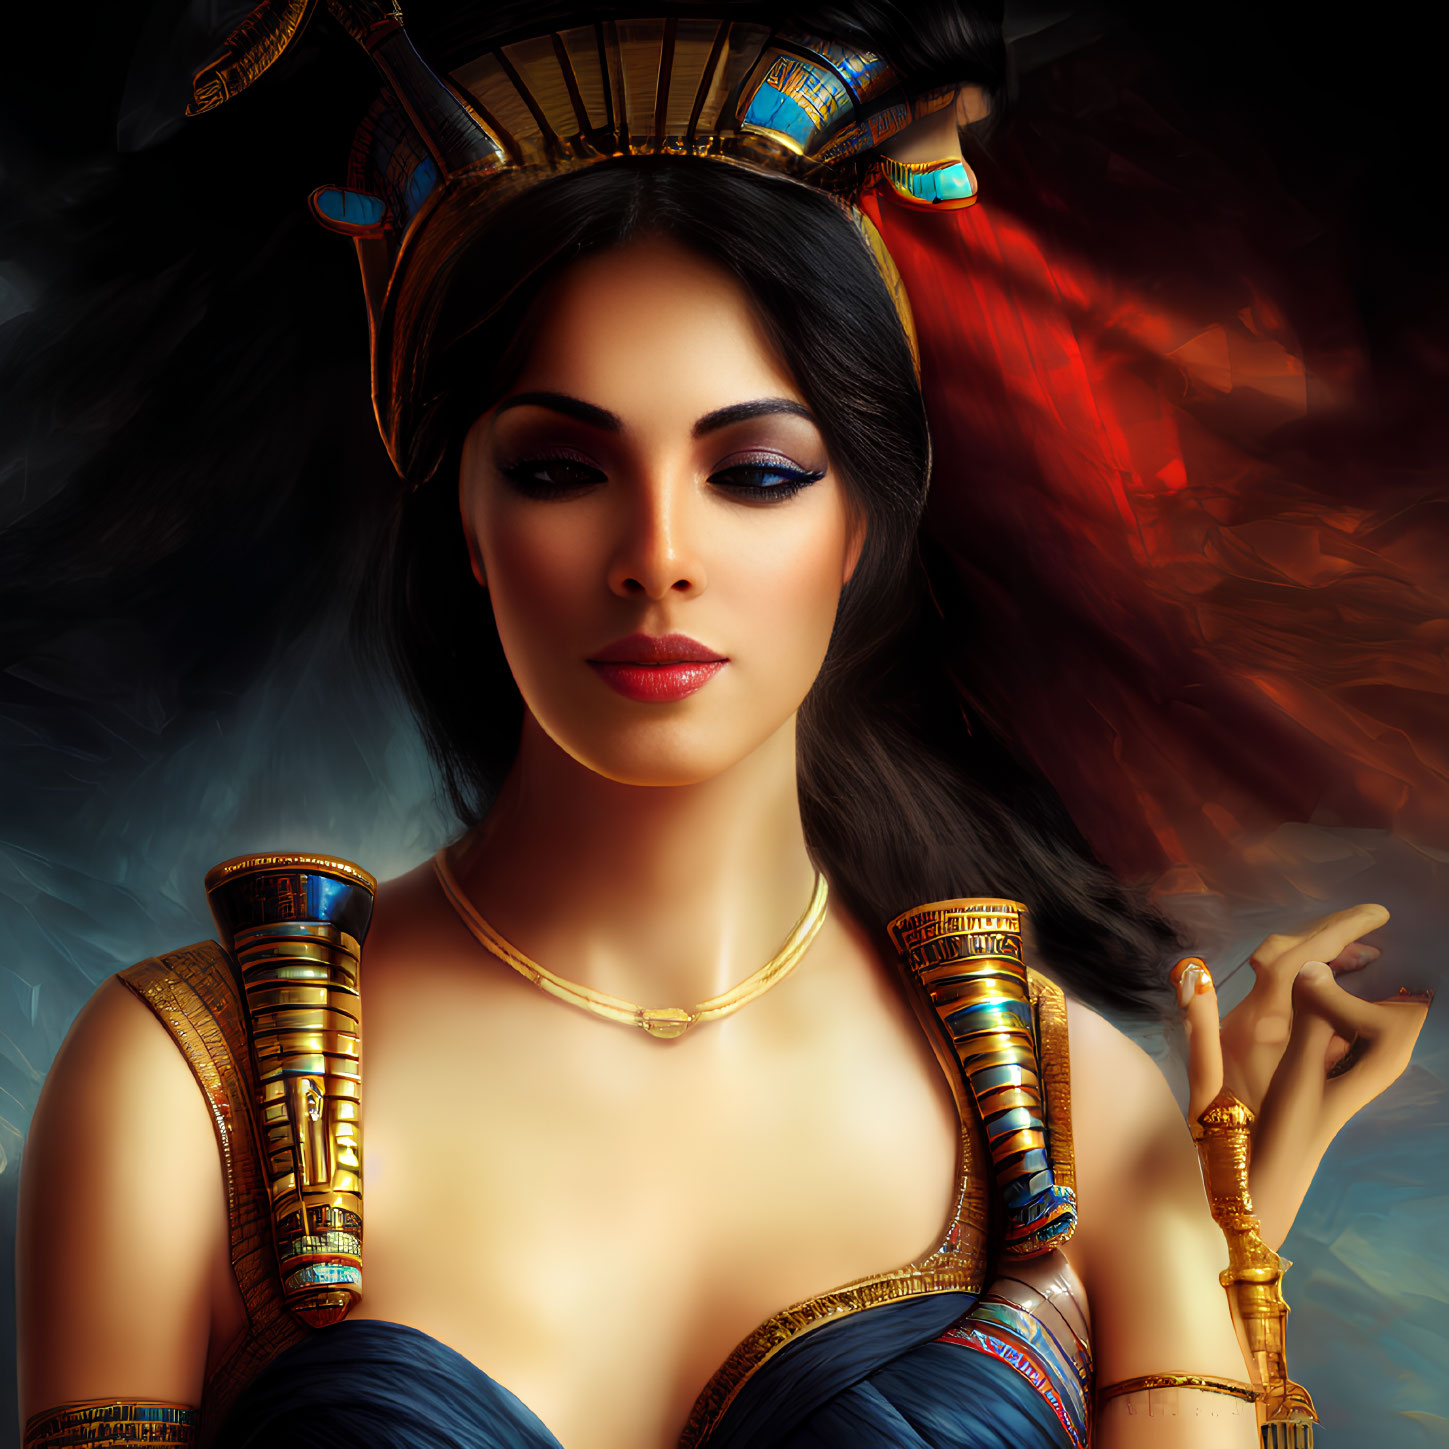 Ancient Egyptian Pharaoh-Inspired Woman Artwork with Gold Jewelry